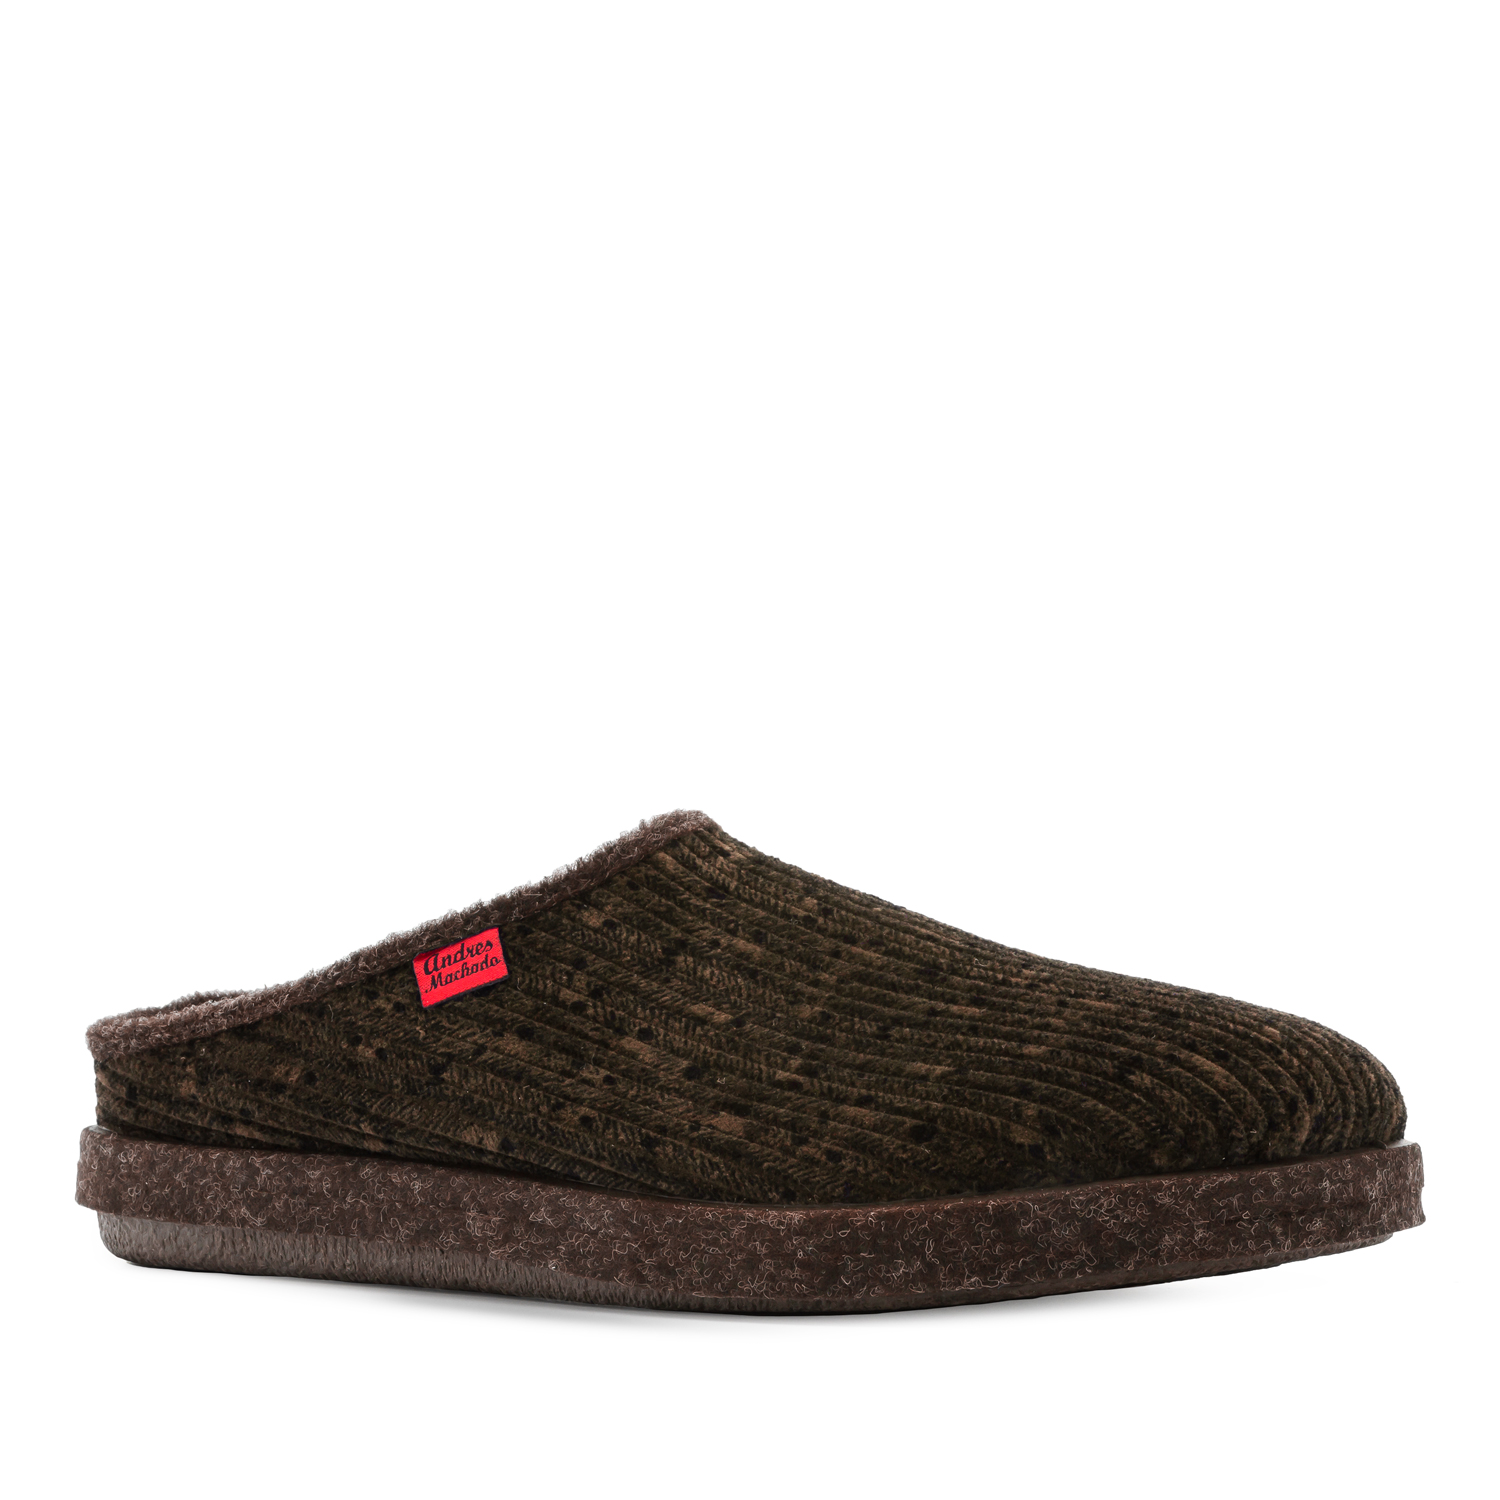 Very comfortable Brown Corduroy Slippers with footbed 